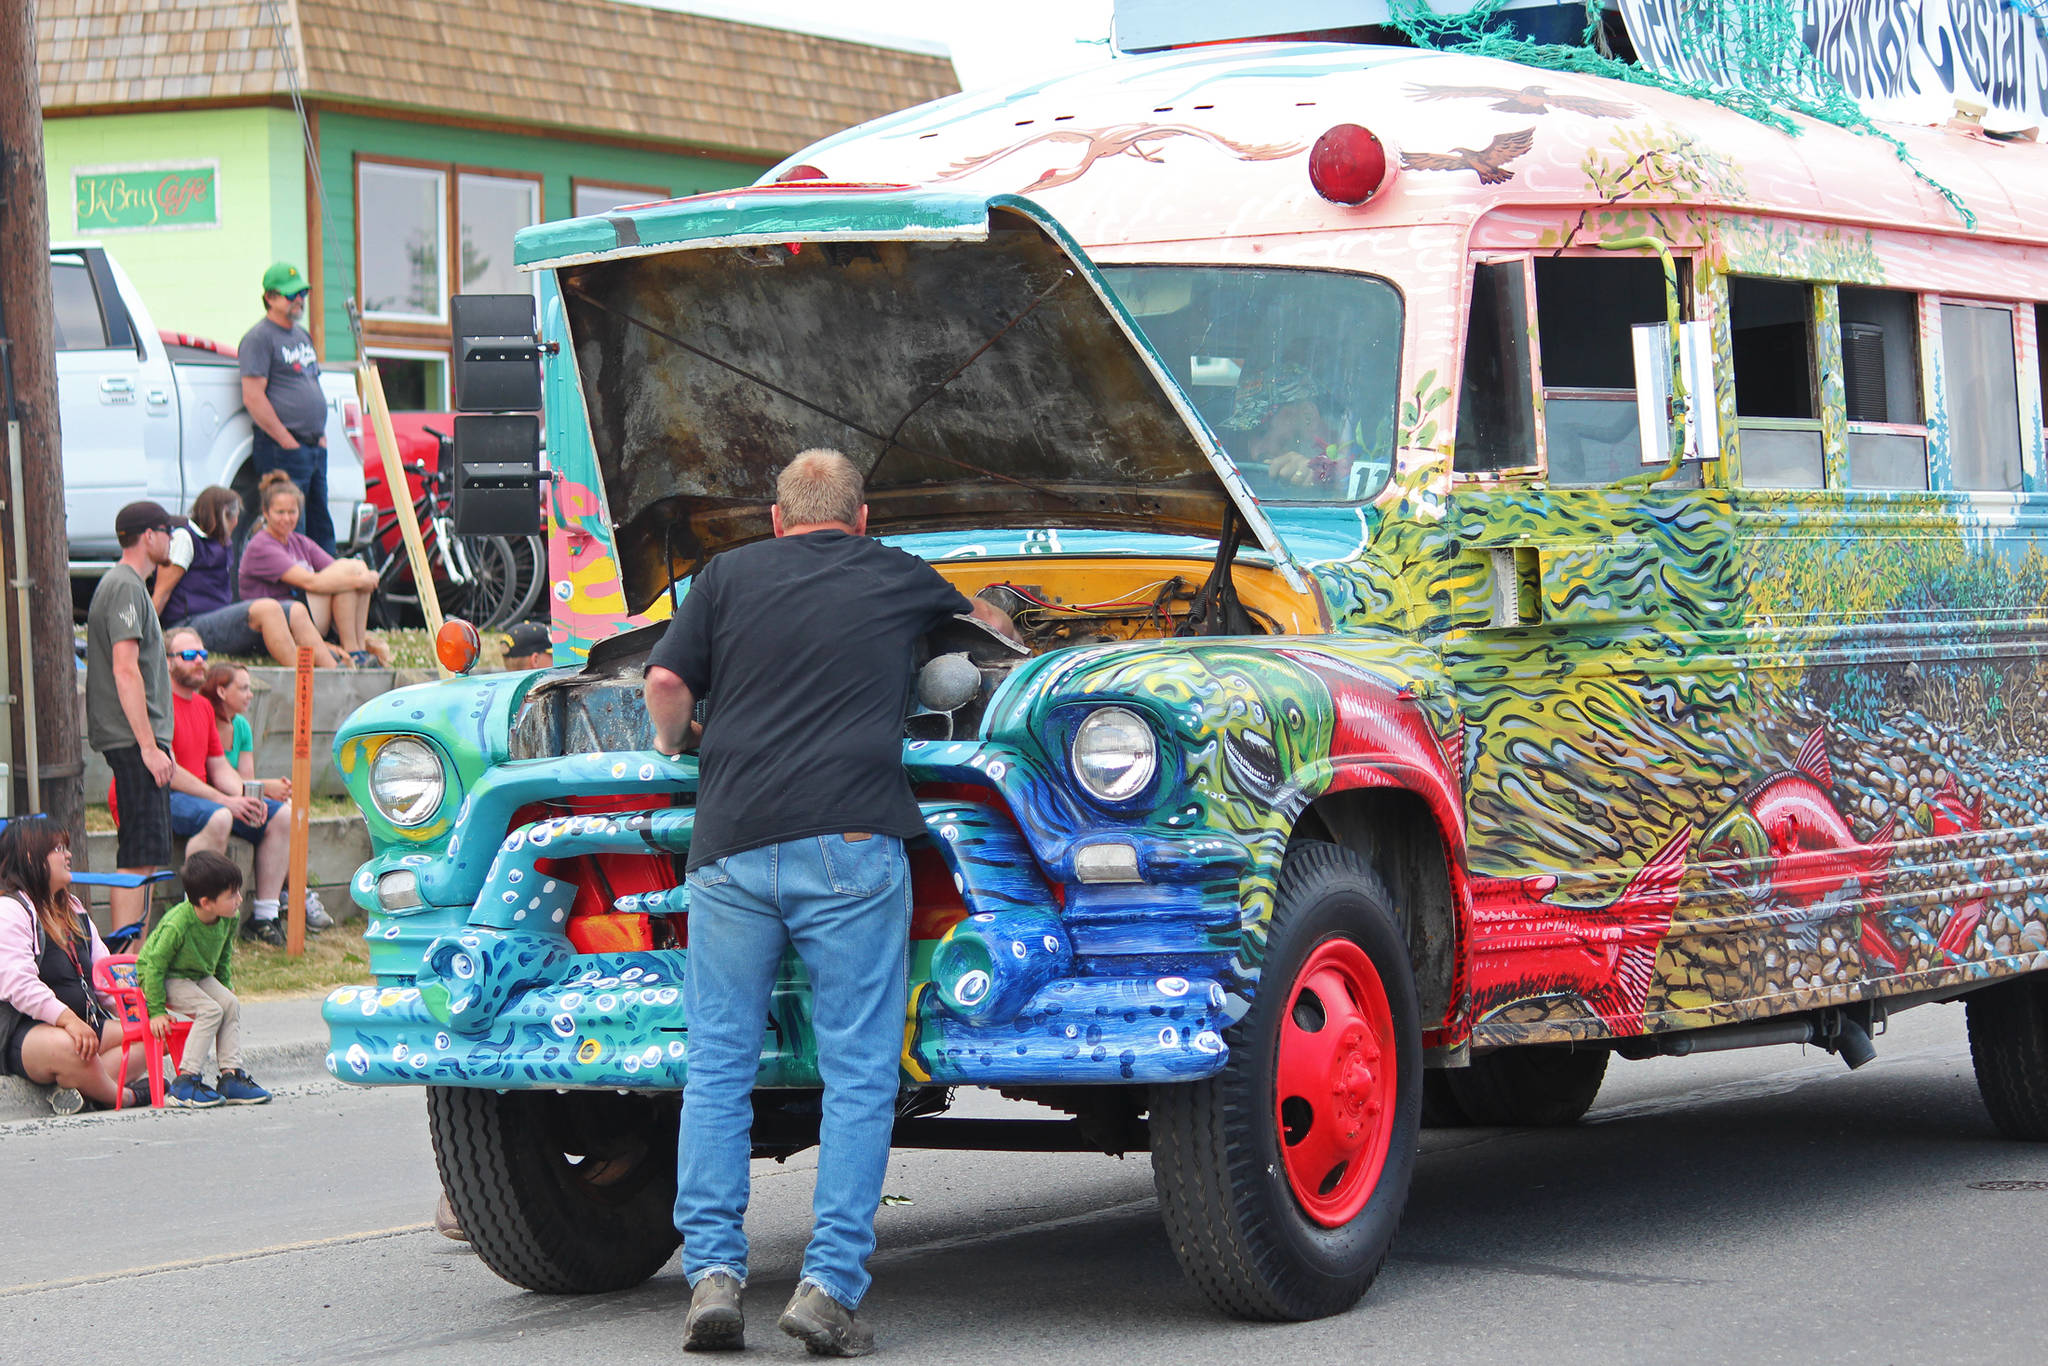 A participant in this year’s July Fourth parade pauses to make a quick fix to the bus used by the Center for Alaska Coastal Studies on Thursday, July 4, 2019 on Pioneer Avenue in Homer, Alaska. The bus roared to live shortly after and continued on its way through the parade route. (Photo by Megan Pacer/Homer News)